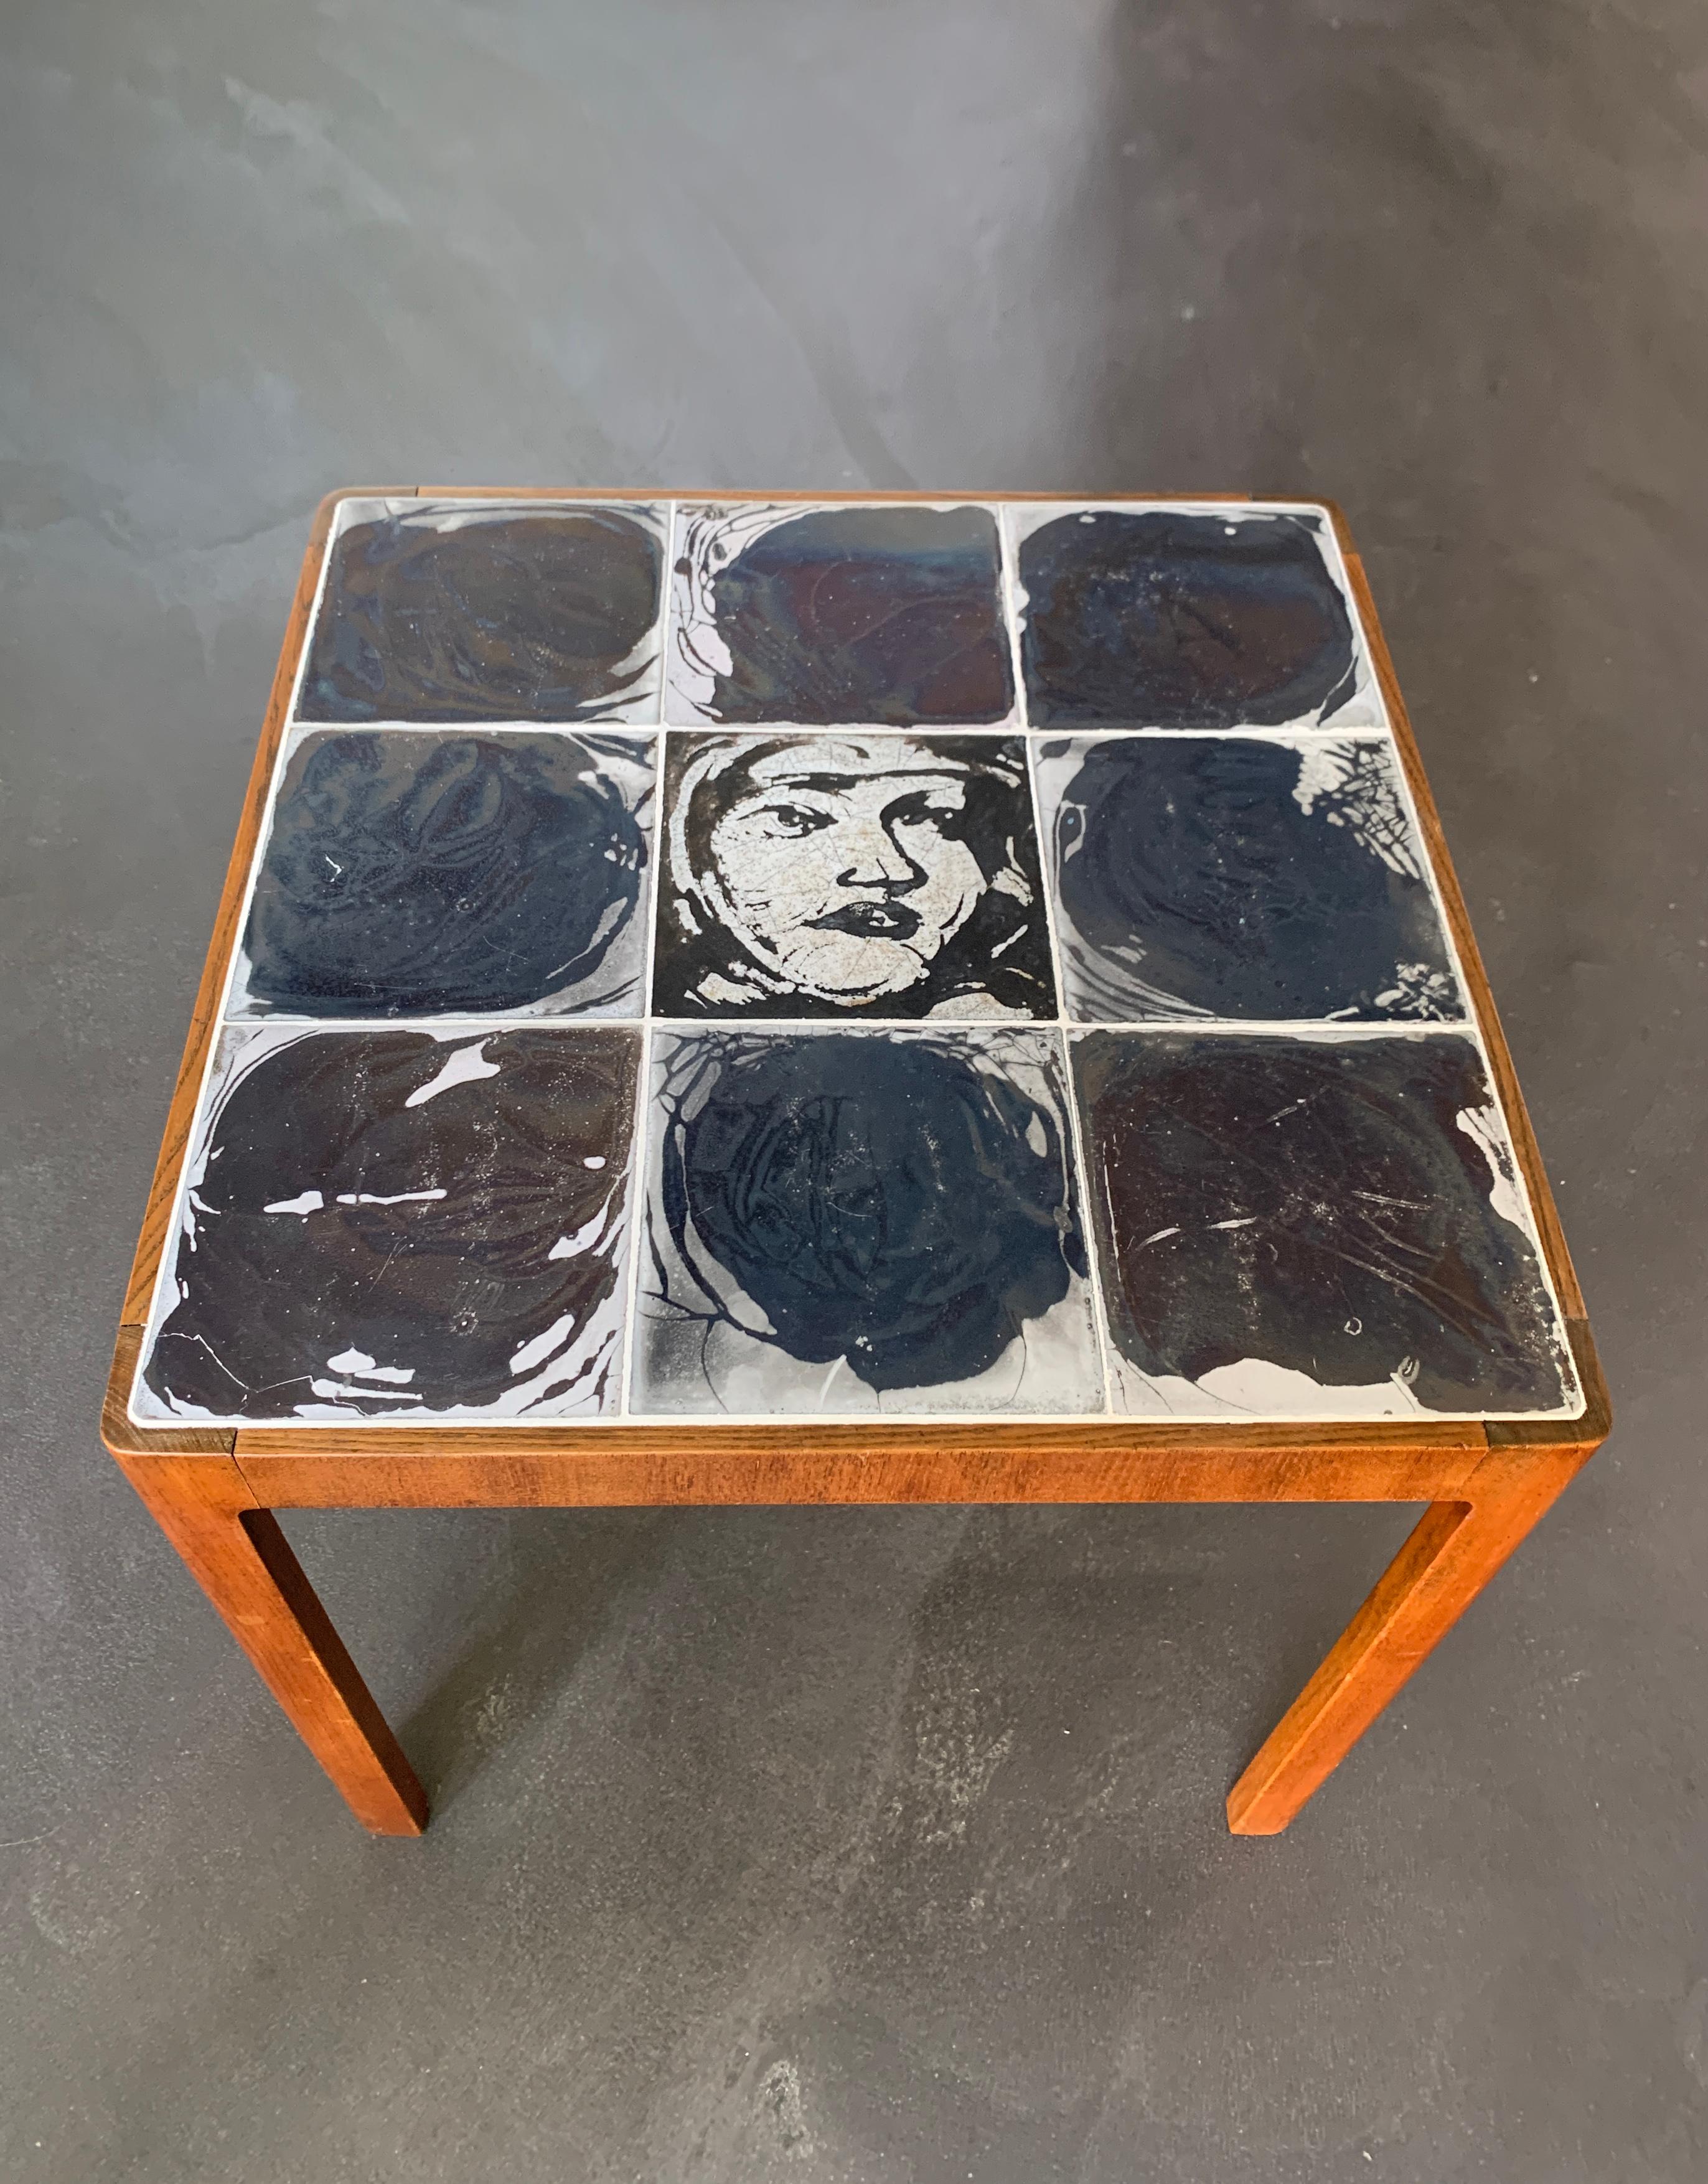 Scandinavian Mid-Century side table. Made of Ceramic tiles and Mahogany wood. 
Tiles made by Herman A Kähler Ceramic, located in the town of Naestved on the island of Zealand (southern Denmark). Kähler ceramics has been founded in 1839 and is still